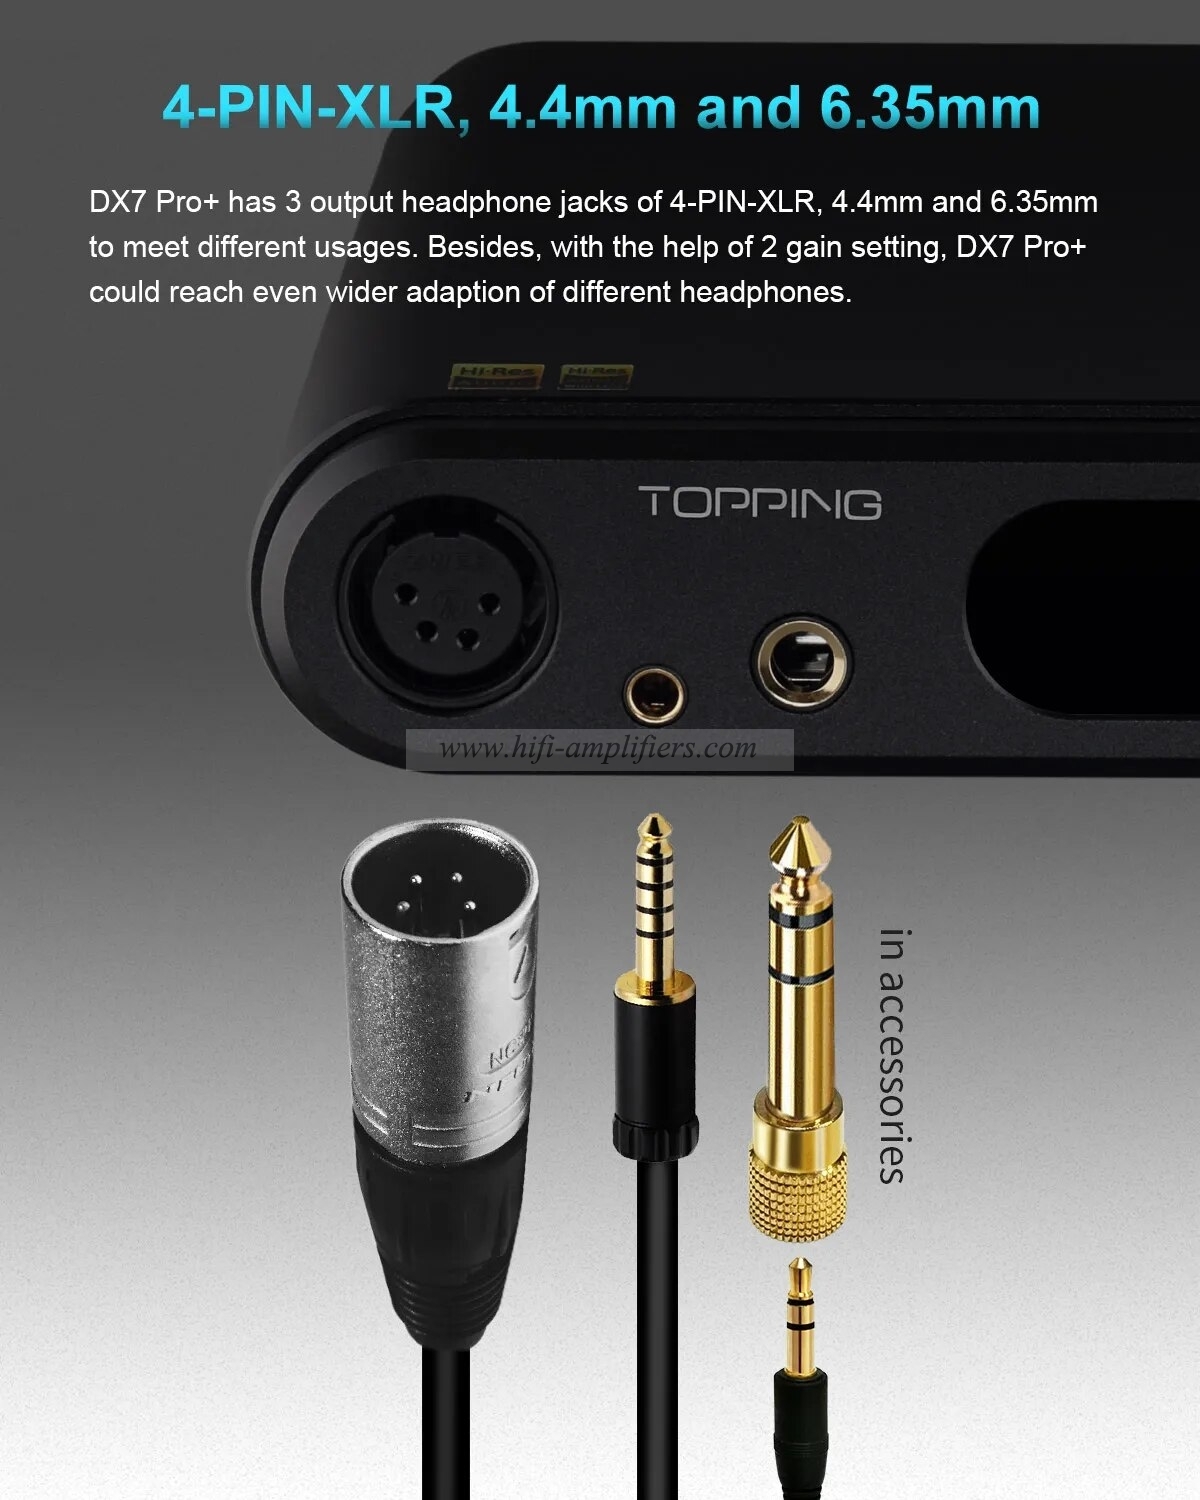 TOPPING DX7 PRO+ DAC&Headphone Amplifier LDAC Hi-Res Audio ES9038PRO Decoder Support up to DSD512&PCM768kHz